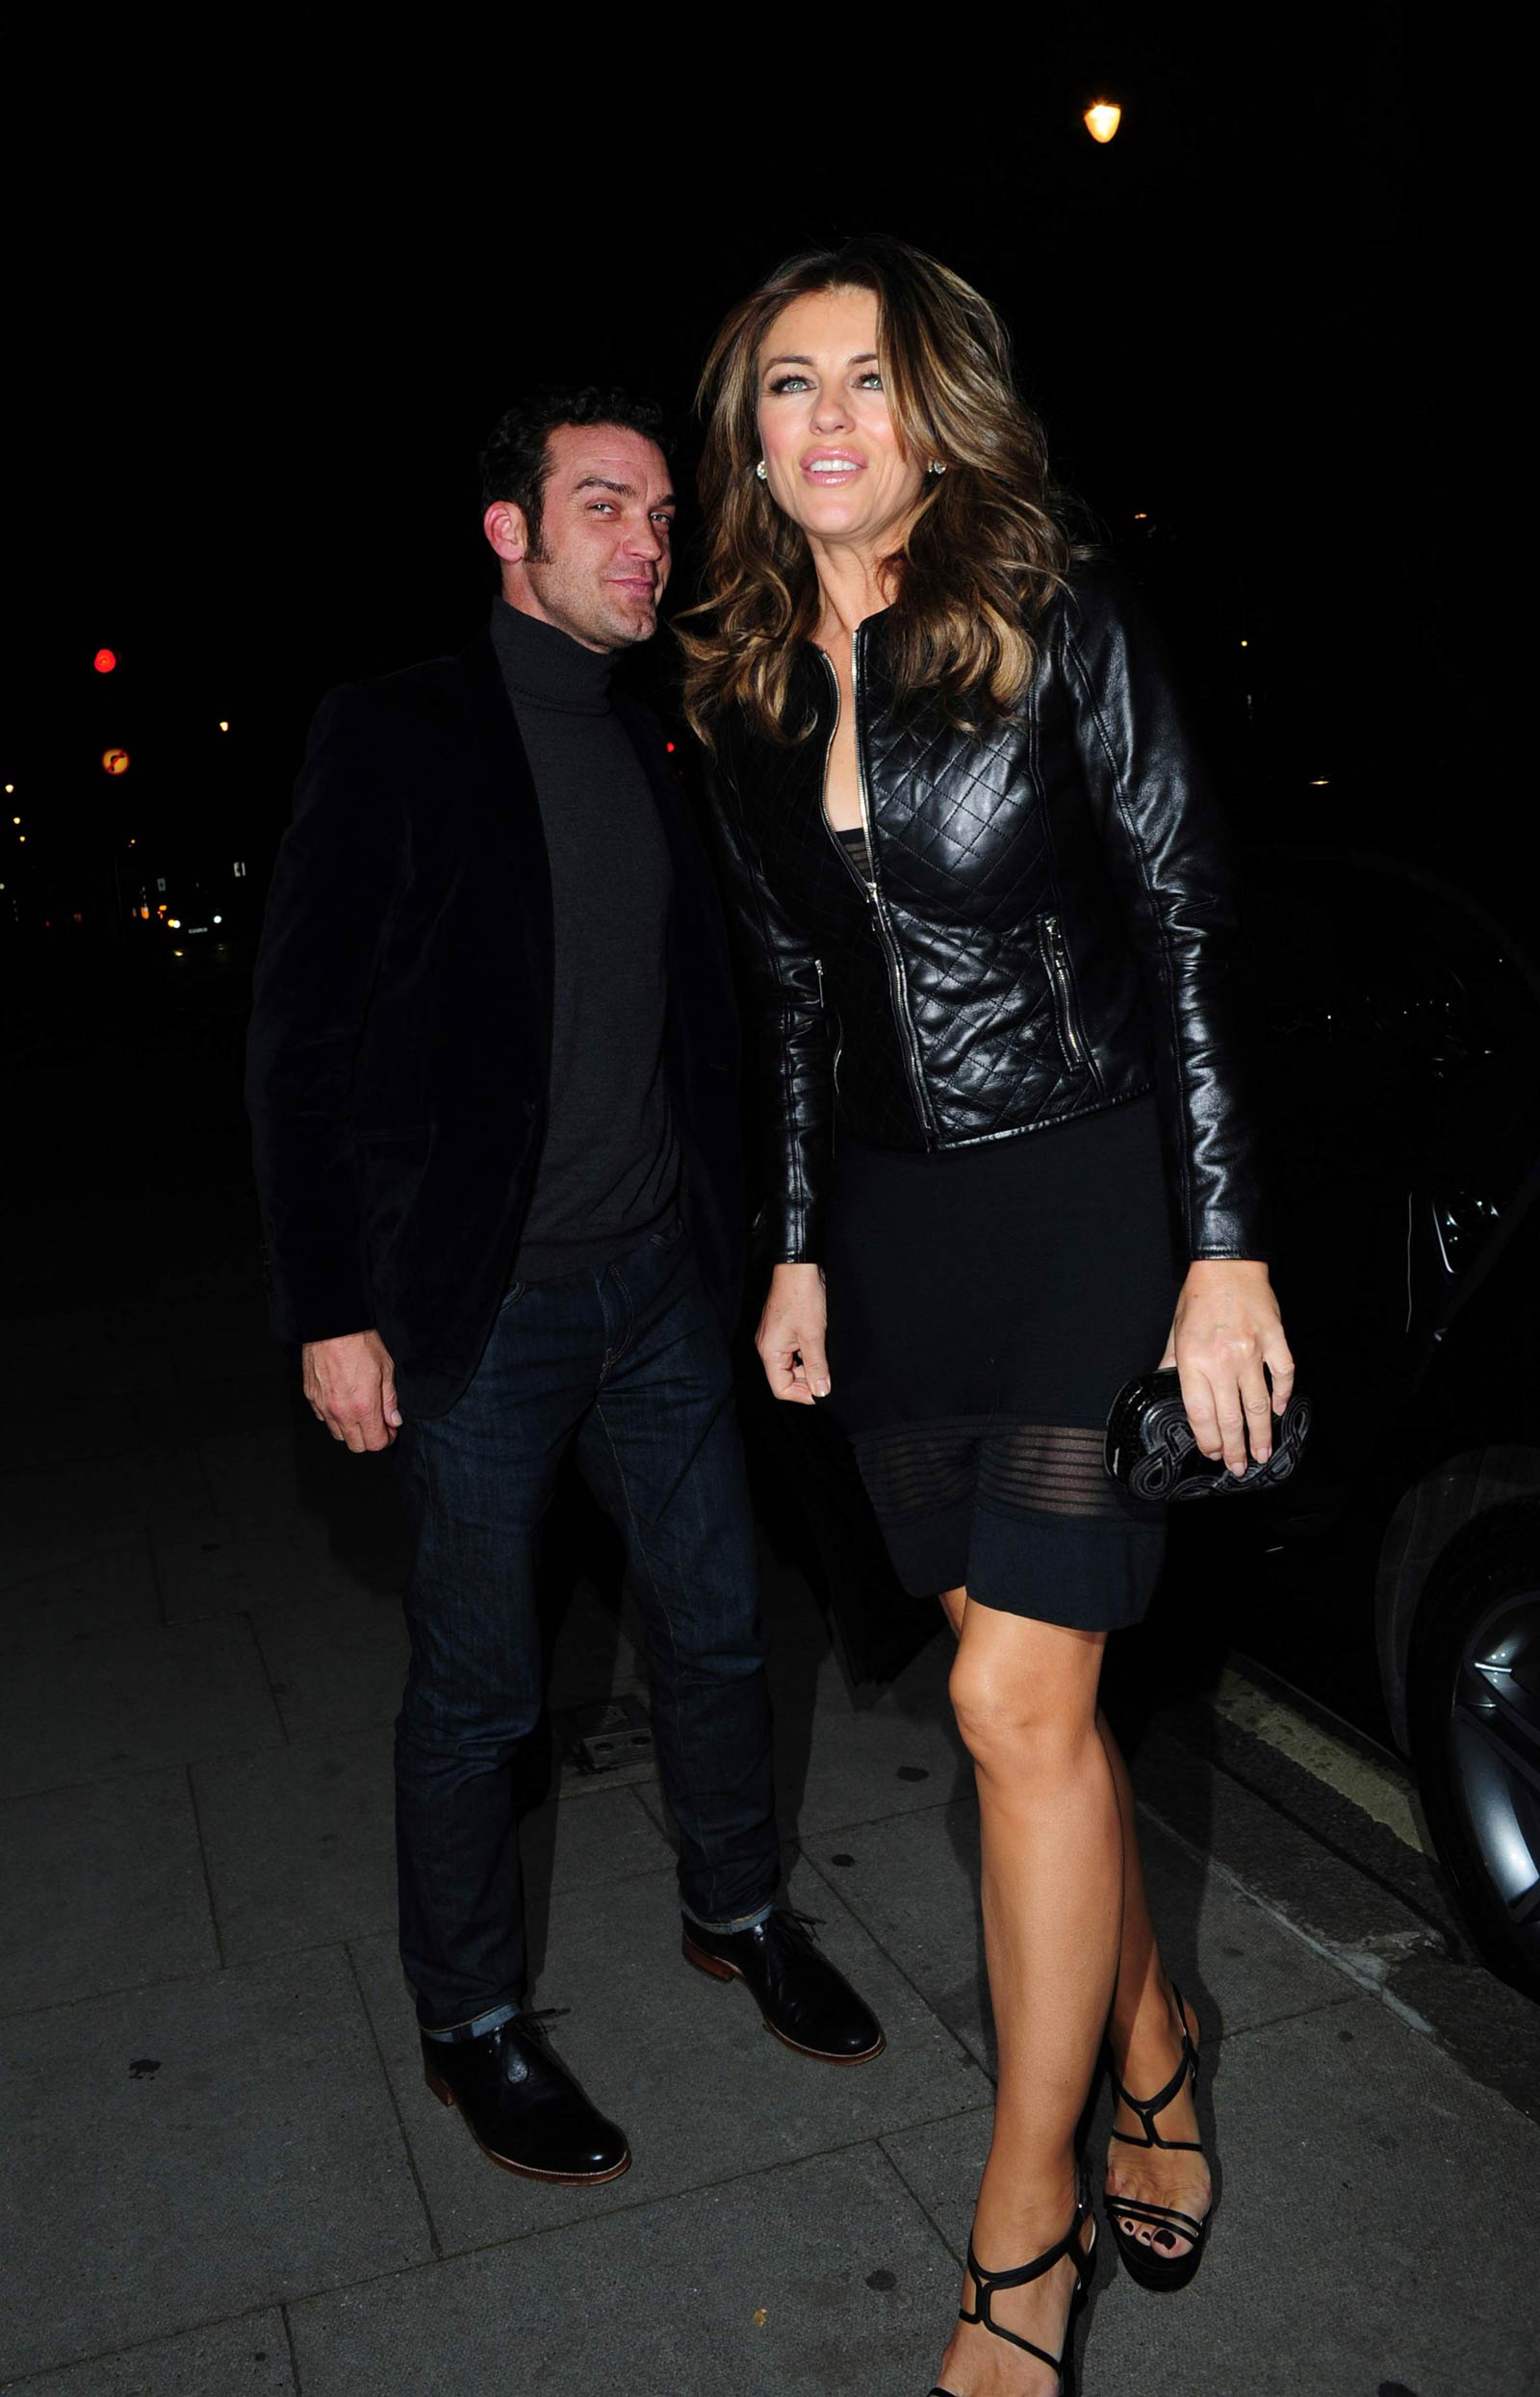 Liz Hurley spotted Night Out at Scott’s Restaurant